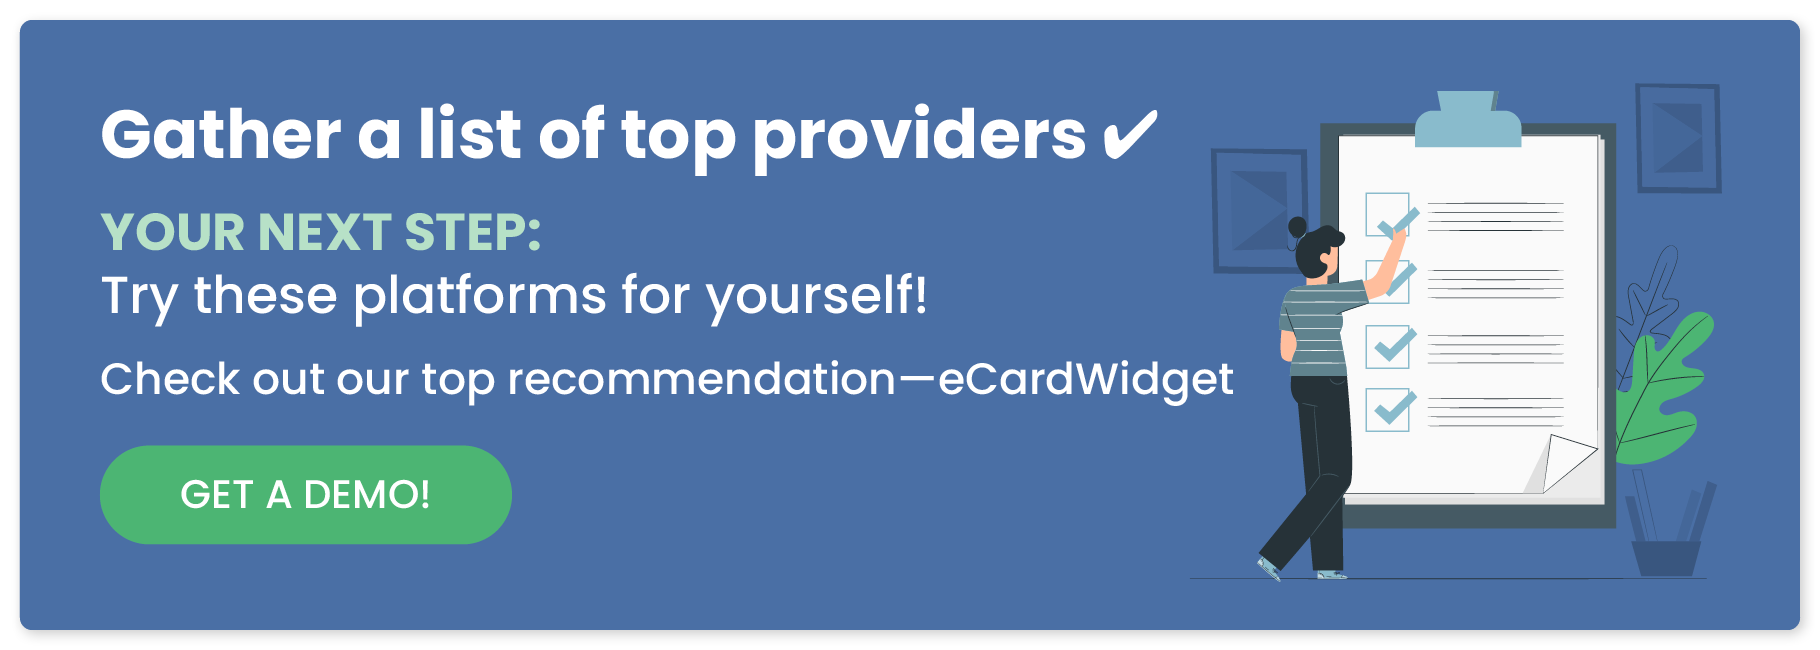 Get a demo of the top recommended employee recognition platform, eCardWidget.